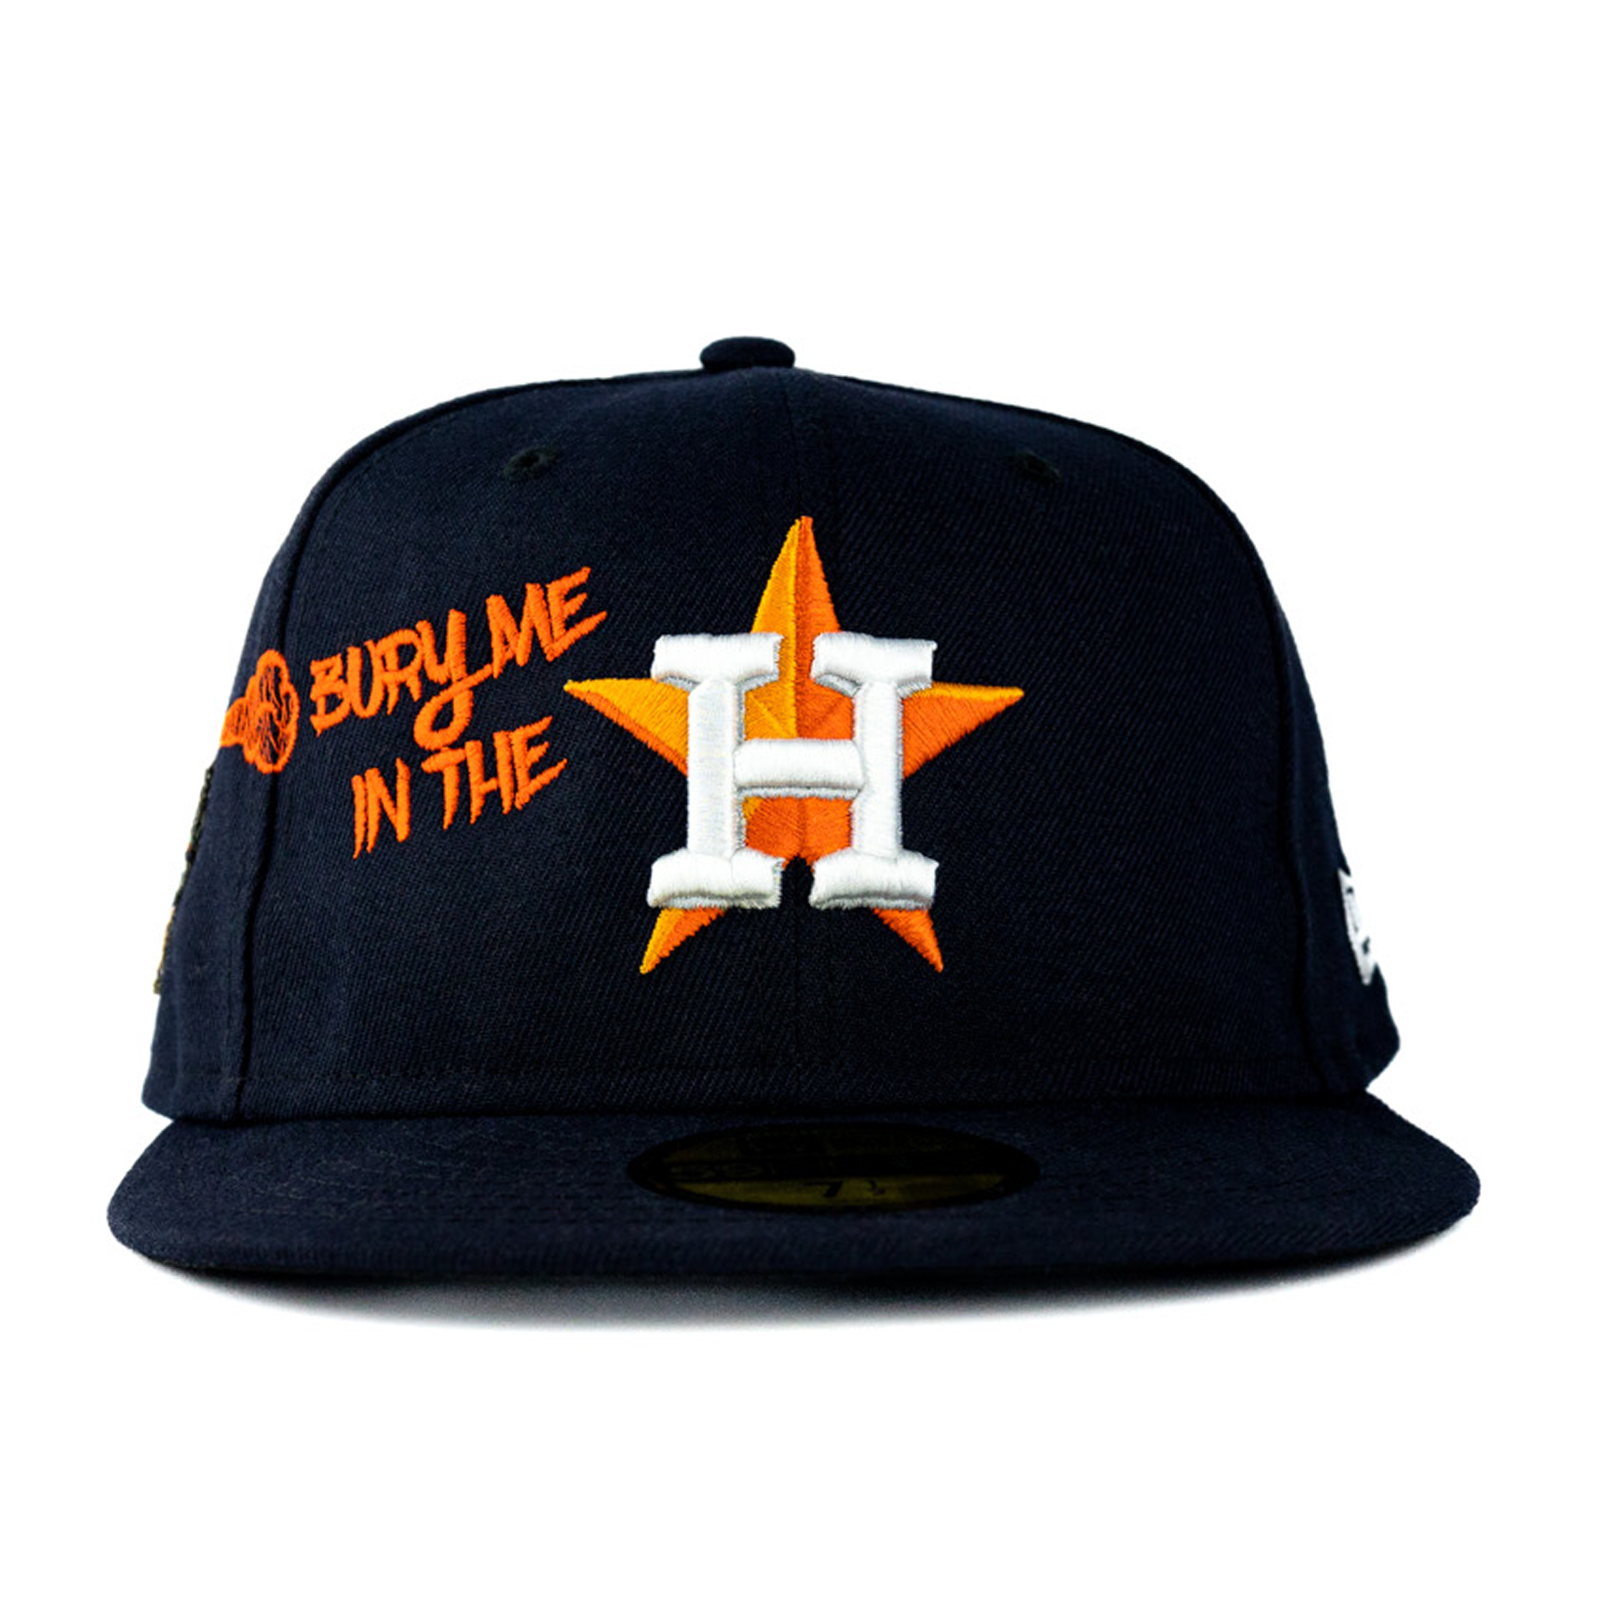 Limited Edition Custom Houston Astros Fitted Hat - Navy 8